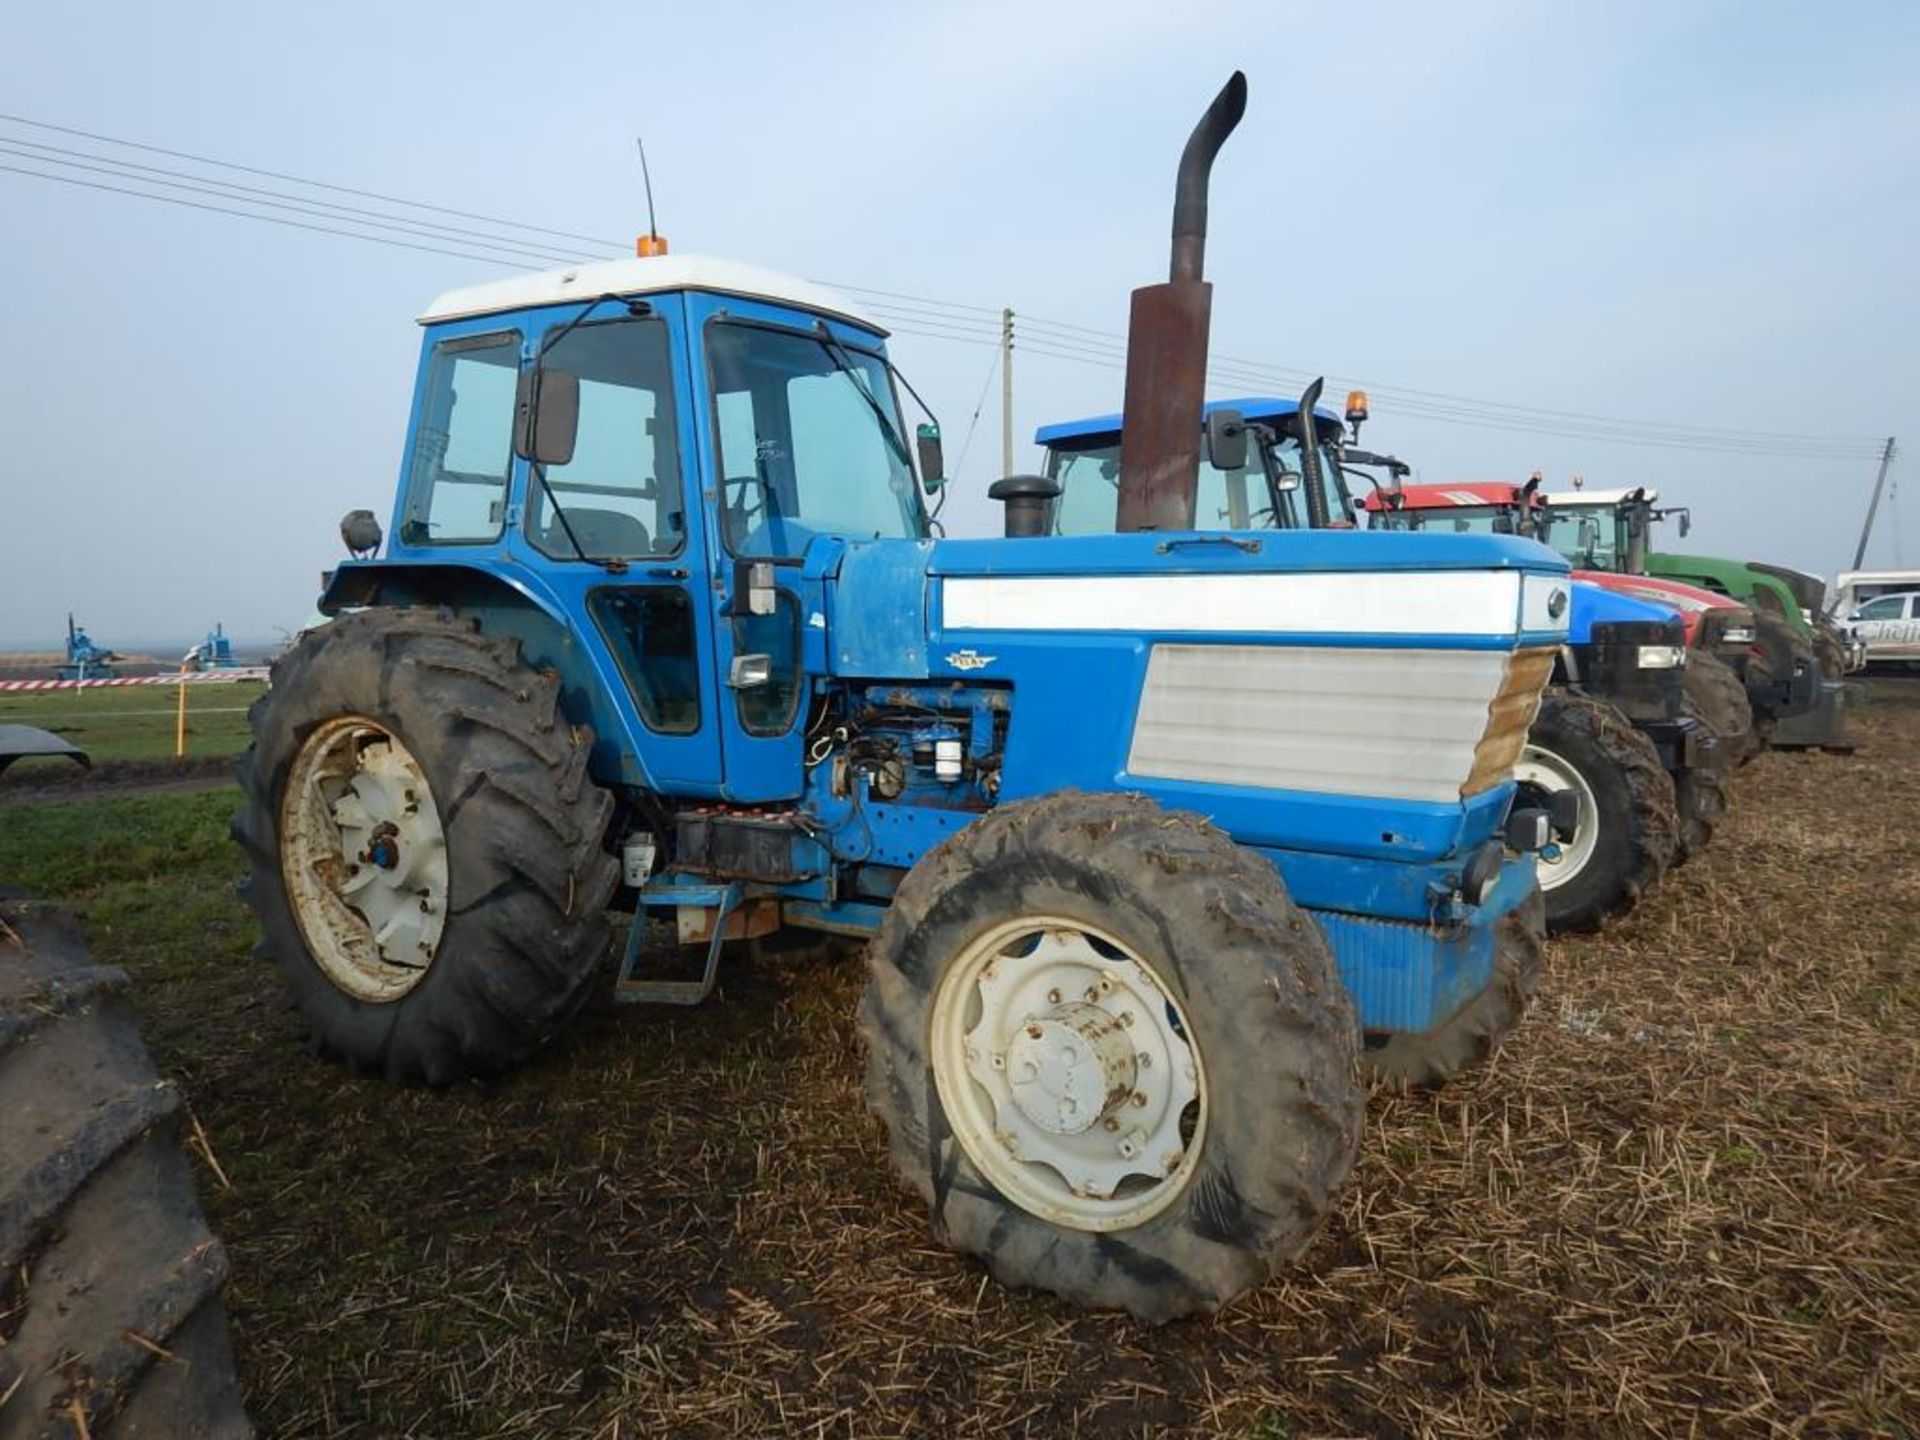 1985 FORD TW-25 4wd TRACTOR Fitted with front underslung weight, rear inside wheel weights, Q cab